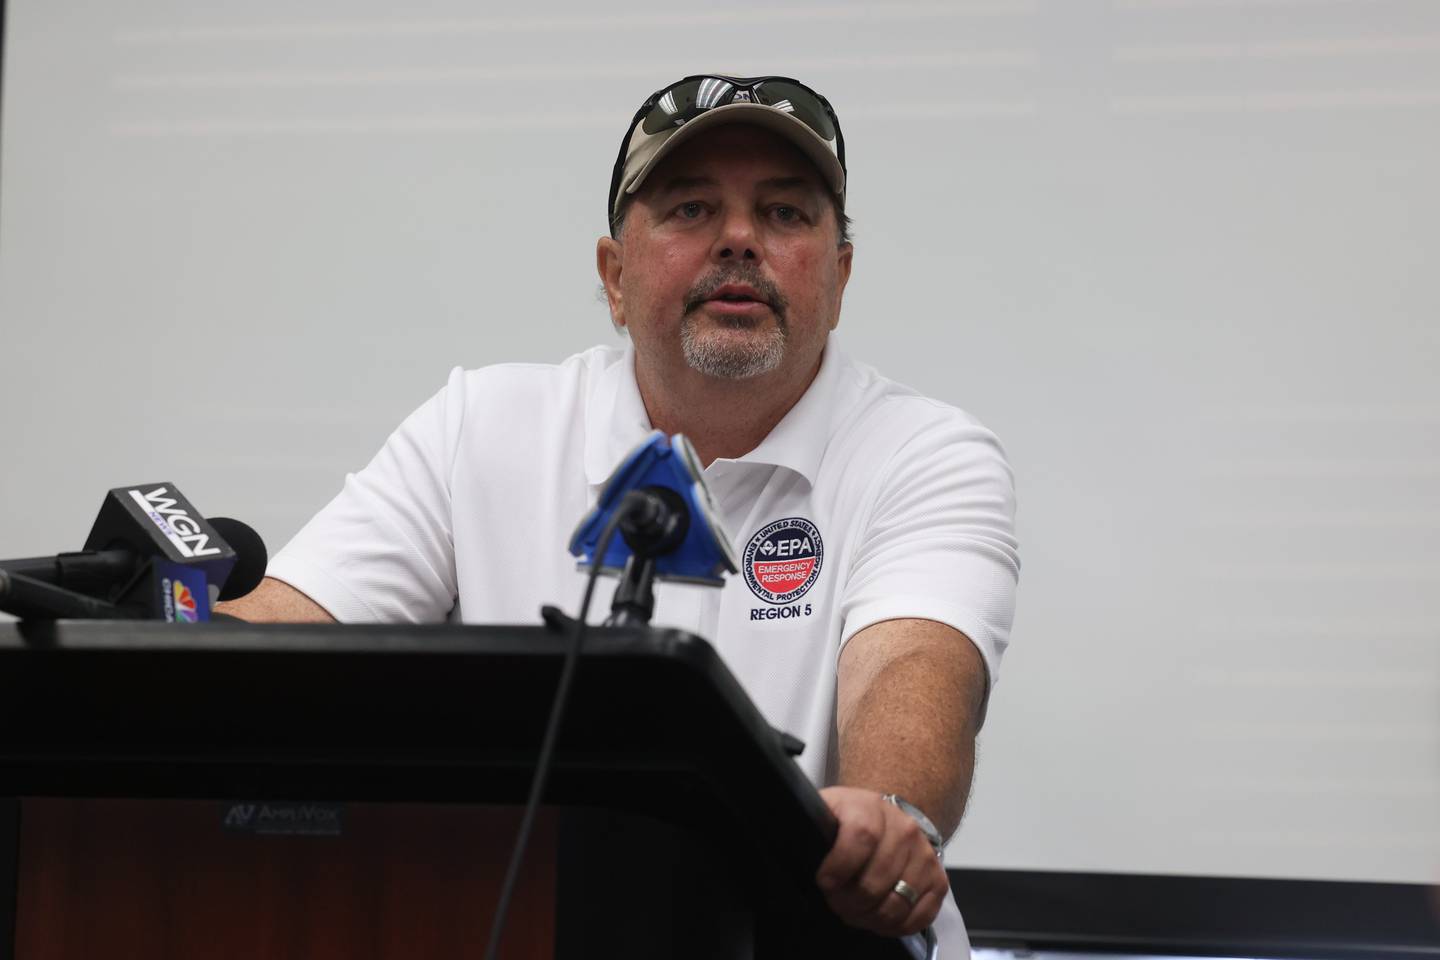 Jim Mitchell, of the Environmental Protection Agency Region 5, gives an update during a press conference on the water and air quality as a result of the Tuesday fire at the Tri-County Stockdale facility. Wednesday, July 20, 2022 in Shorewood